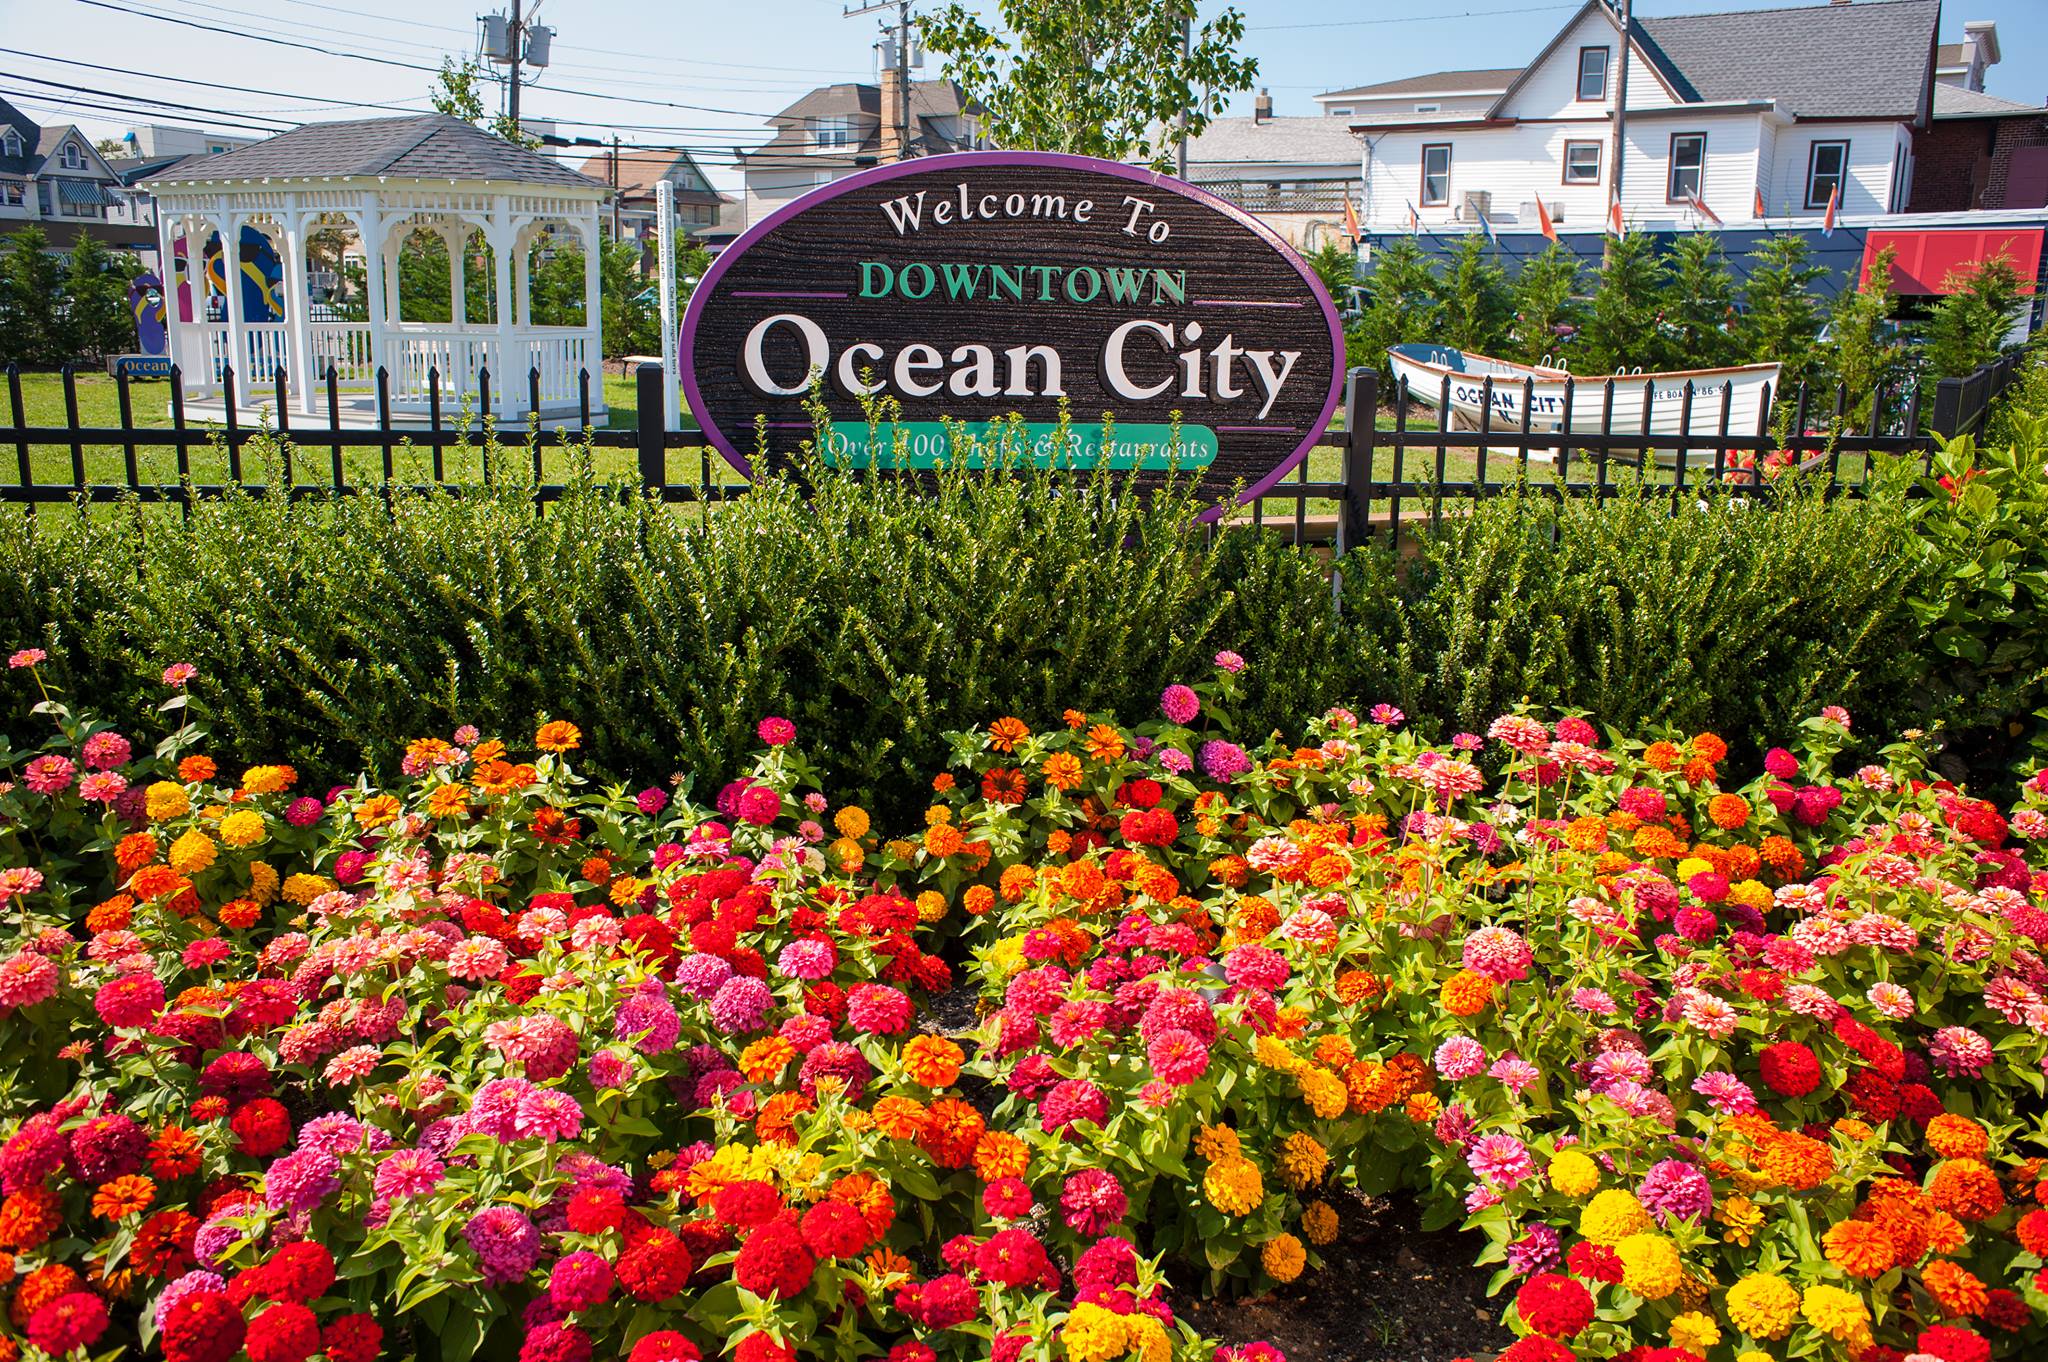 Welcome to Downtown Ocean City, NJ